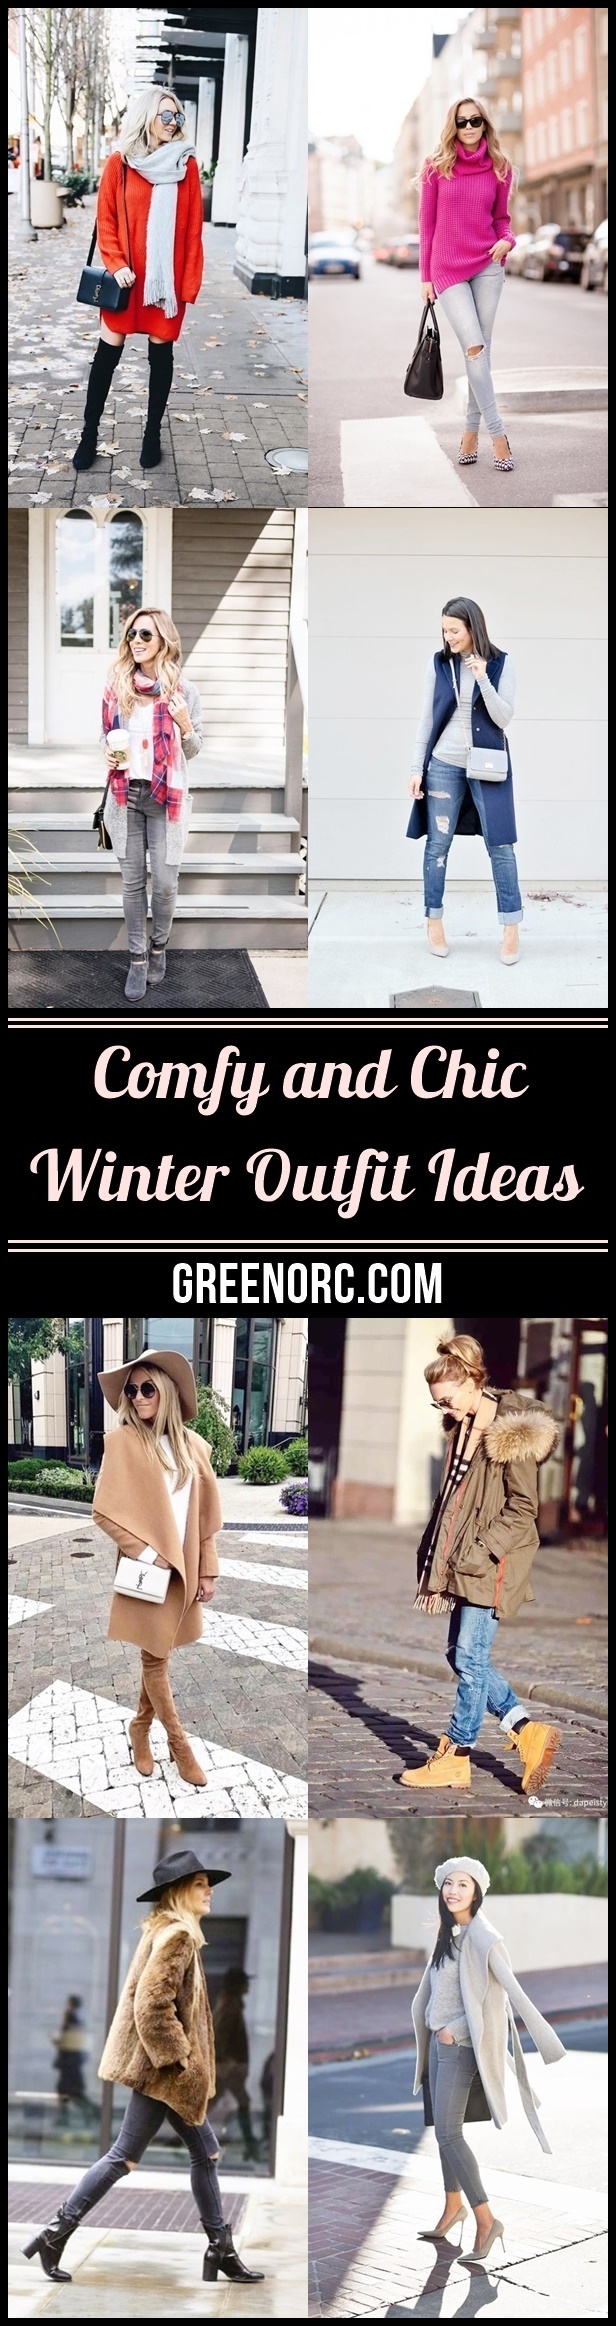 Comfy and Chic Winter Outfit Ideas